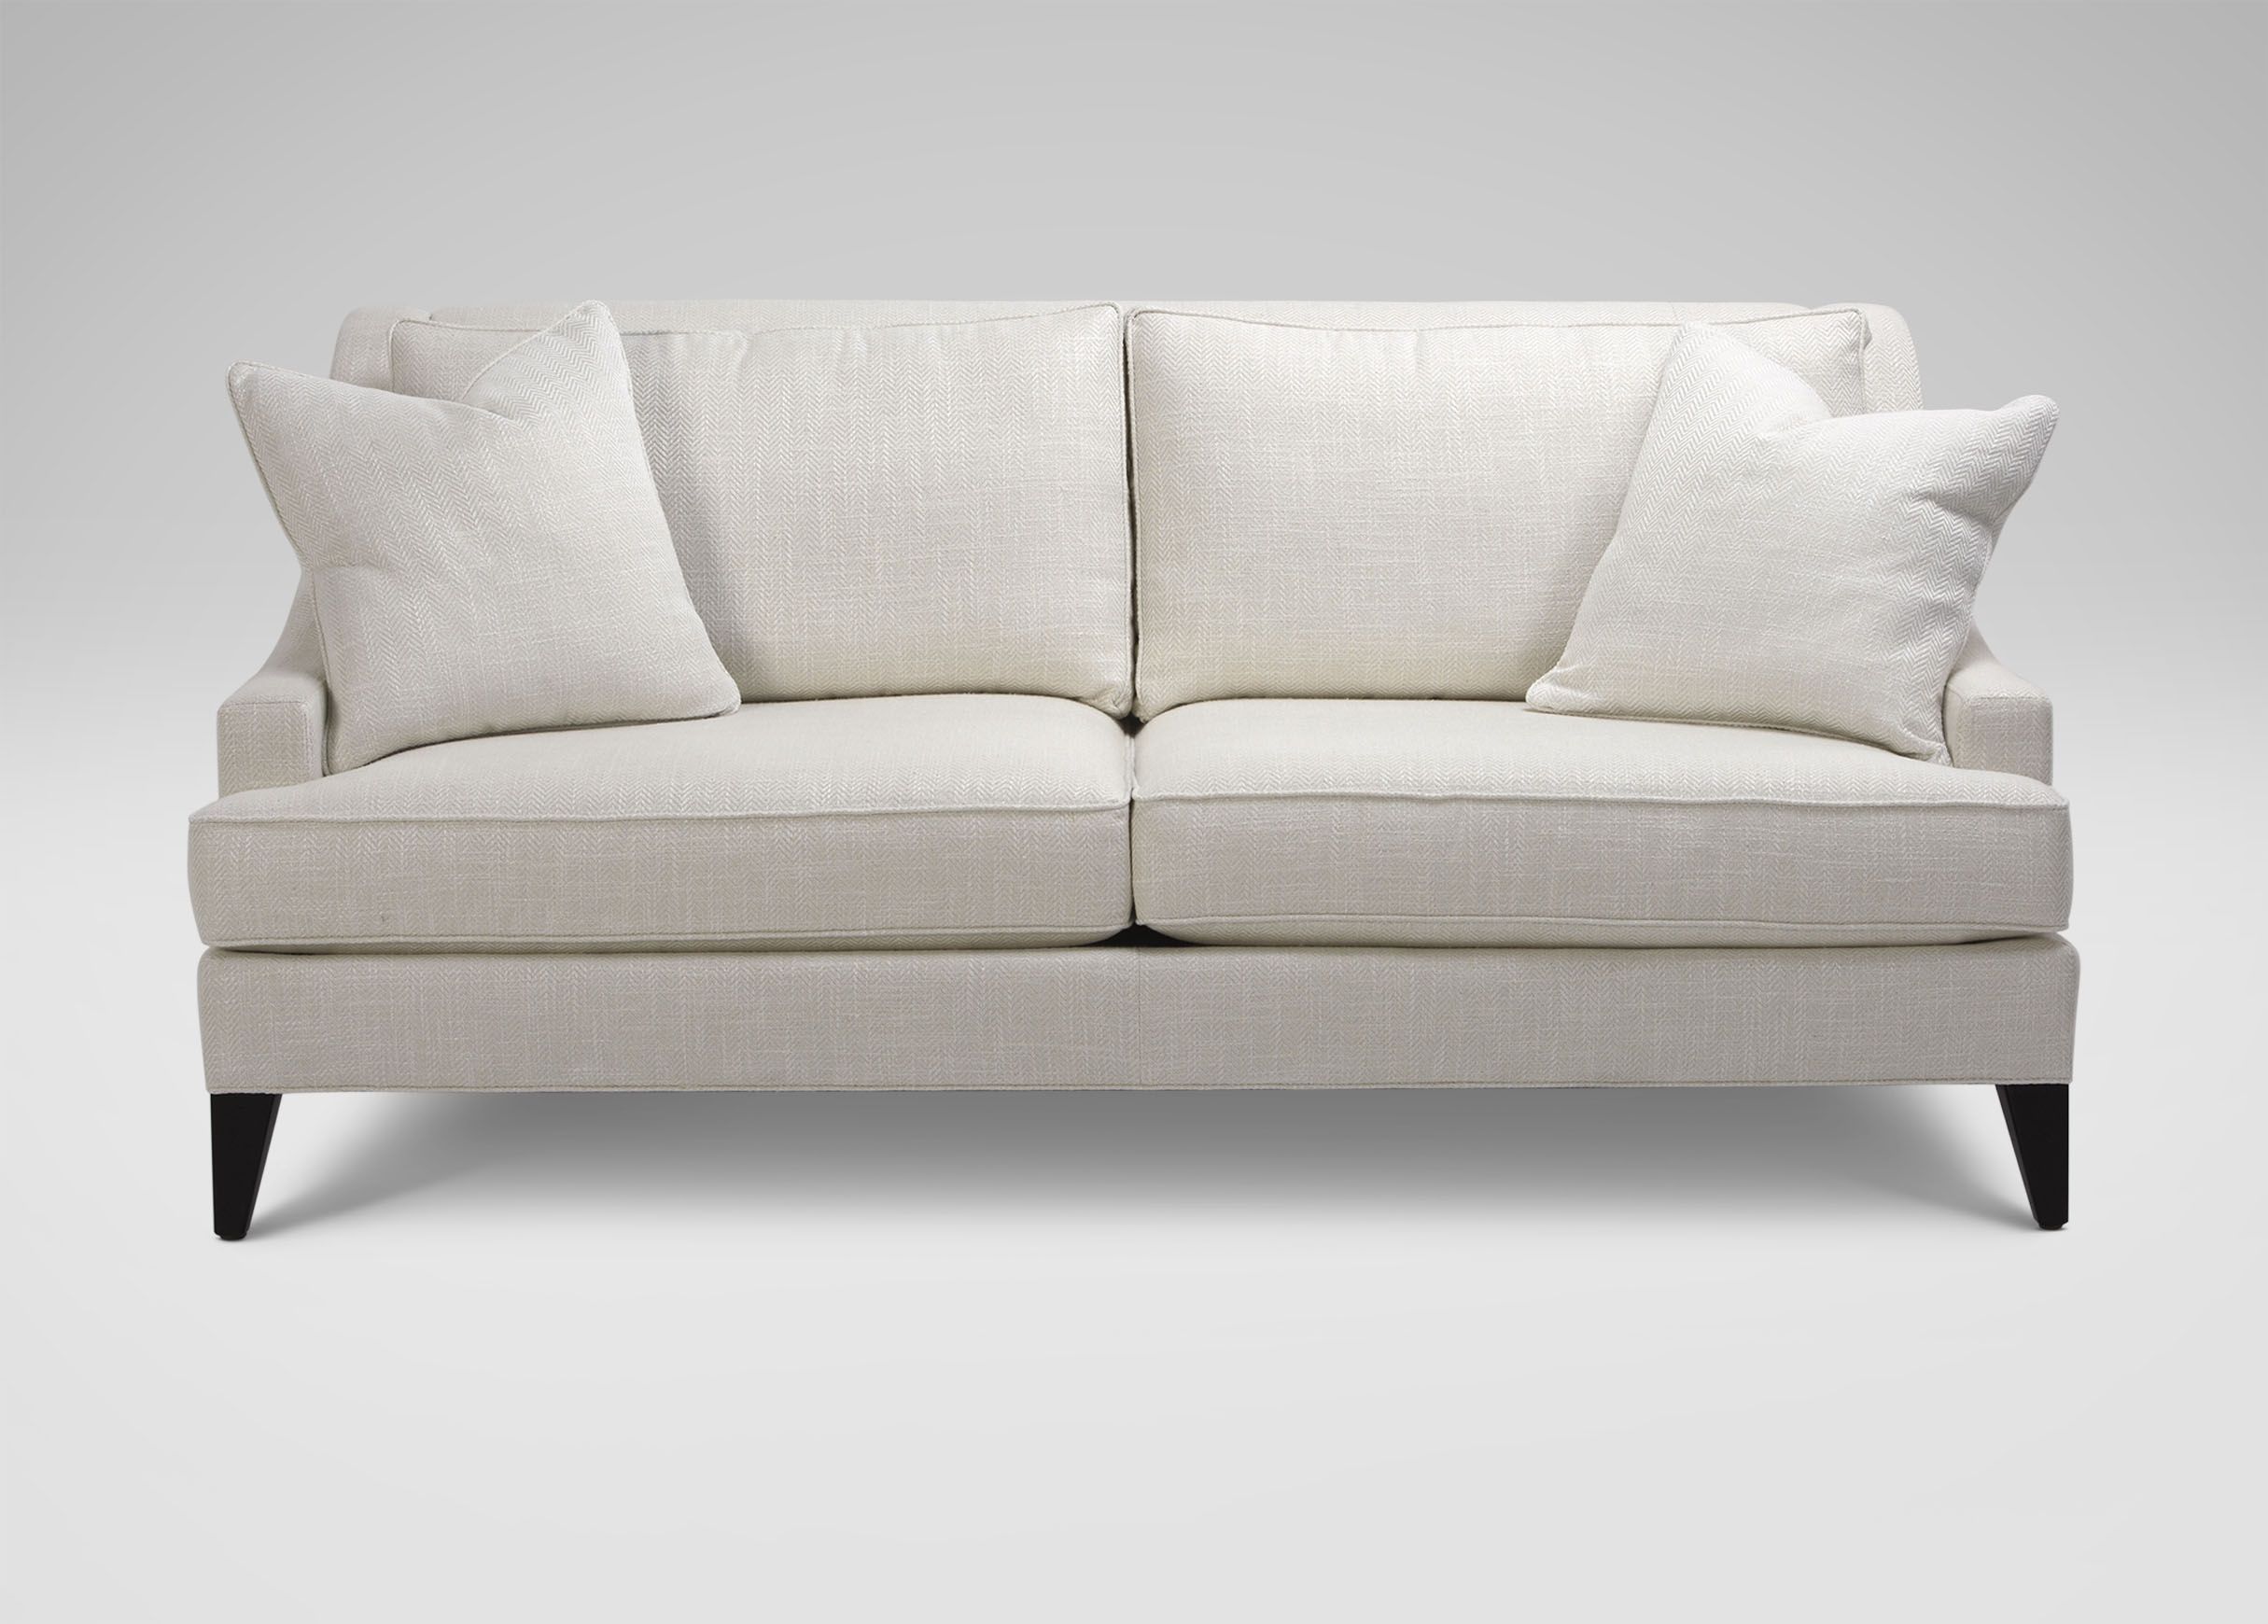 Emerson Sofa Sofas Loveseats Pertaining To Ethan Allen Sofas And Chairs (View 3 of 15)